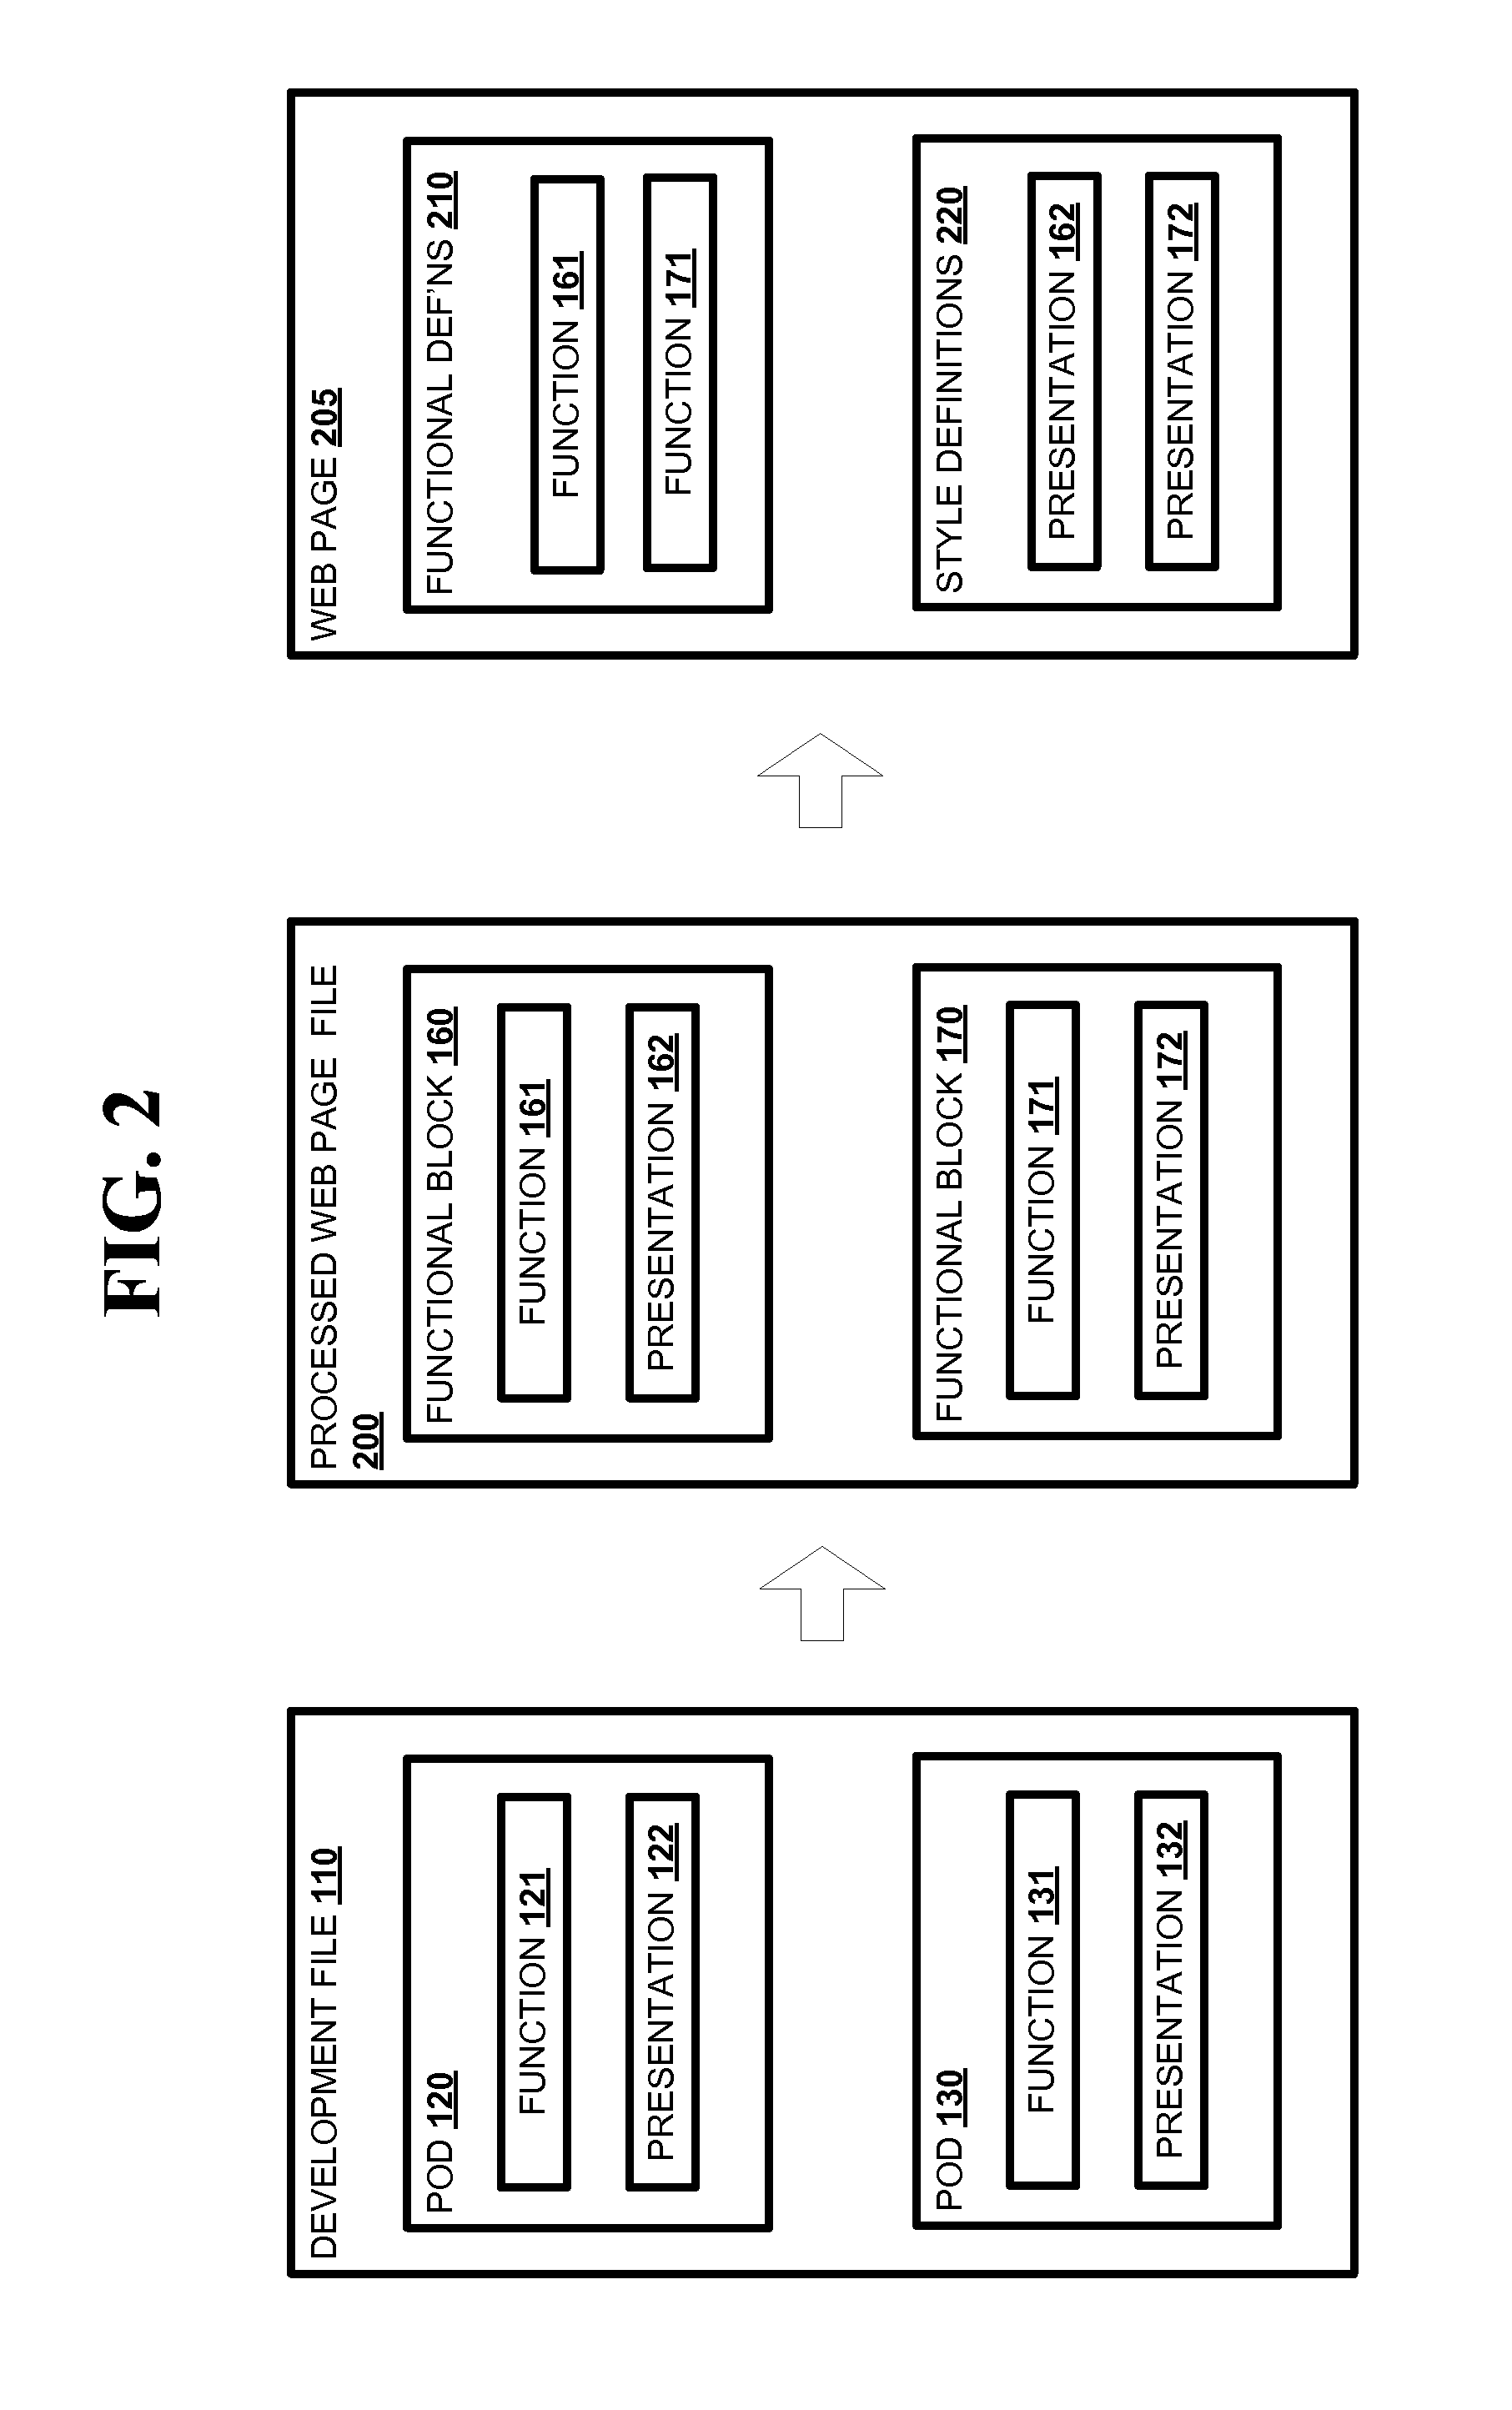 System and Method for Generating Web Pages